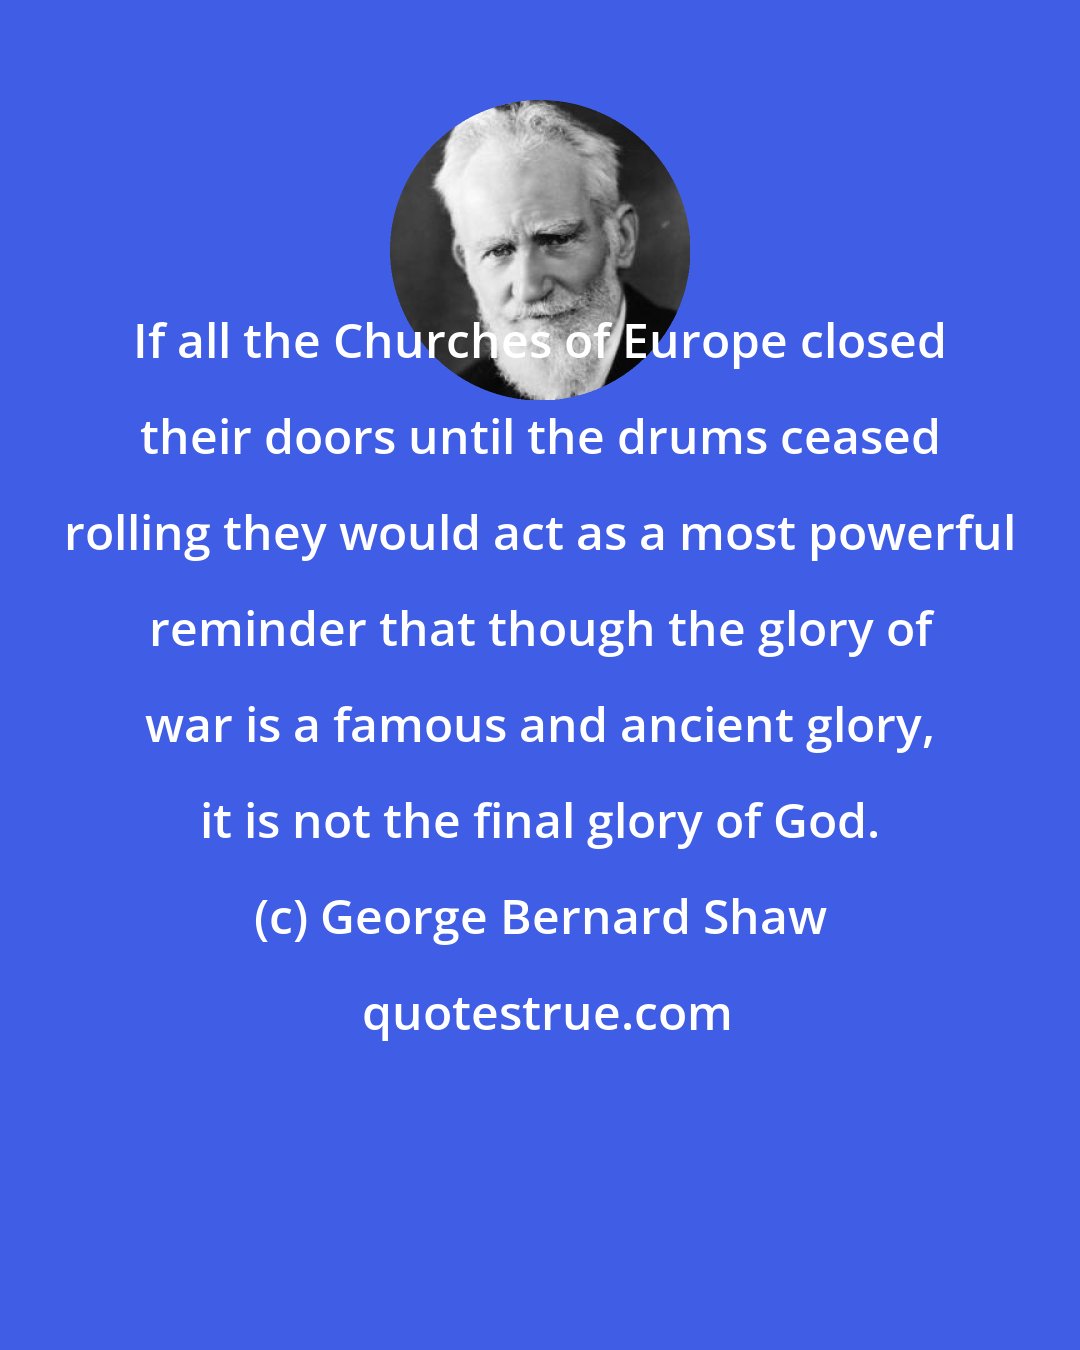 George Bernard Shaw: If all the Churches of Europe closed their doors until the drums ceased rolling they would act as a most powerful reminder that though the glory of war is a famous and ancient glory, it is not the final glory of God.